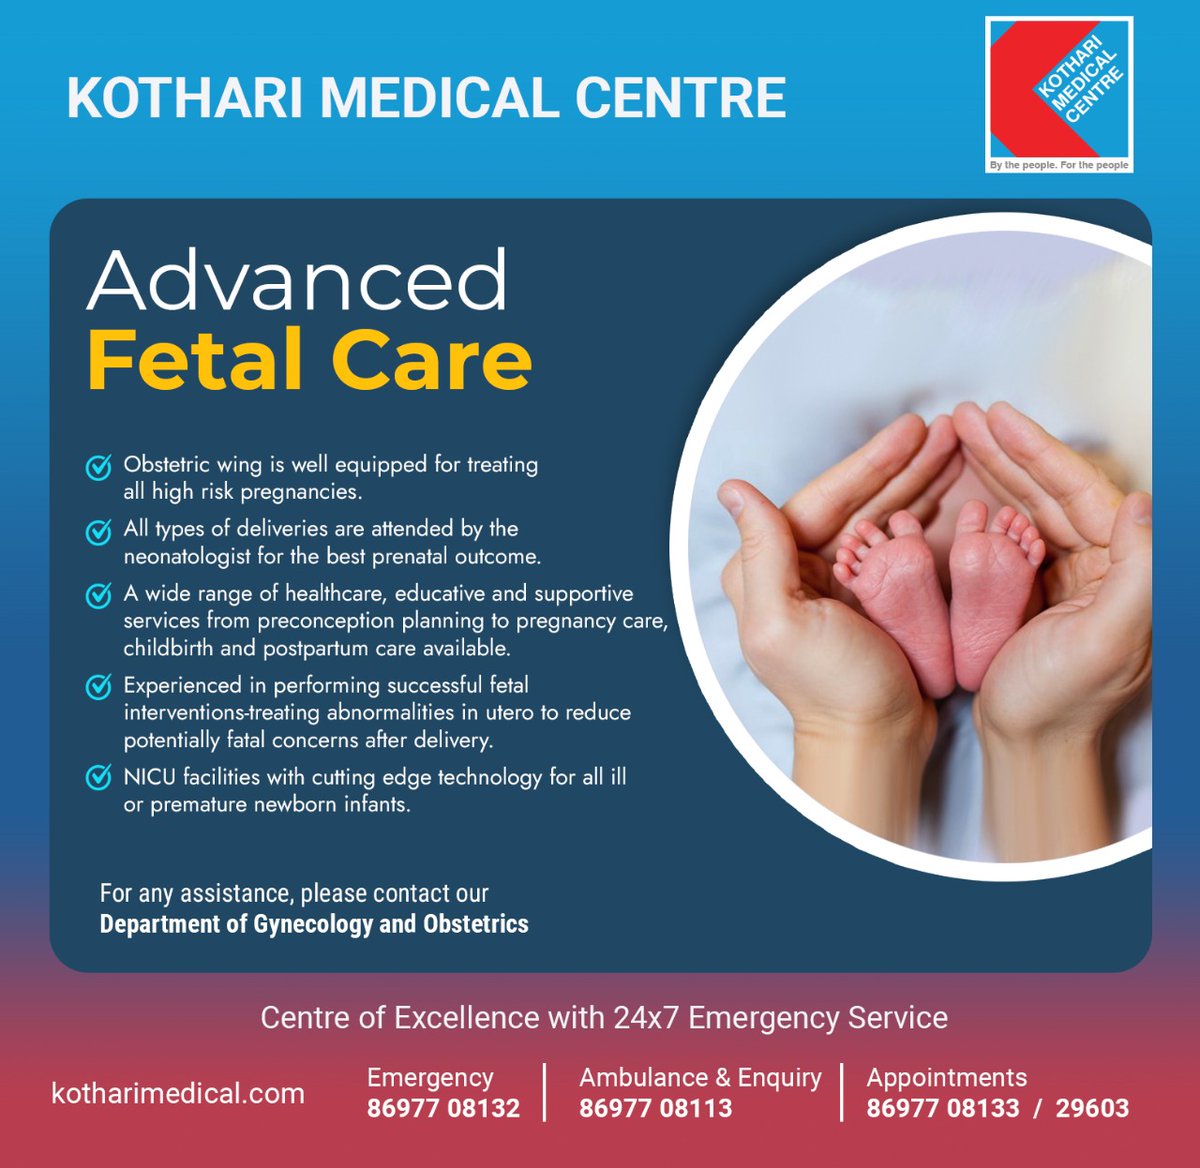 Kothari Medical focuses on managing health concerns of the mother & fetus prior to, during, shortly after pregnancy. Our Fetal Care providing medical care for pregnant women whose unborn babies have health problems. 
#Babies #Fetalcare #Healthcare #Pregnancy #Prenatalcare